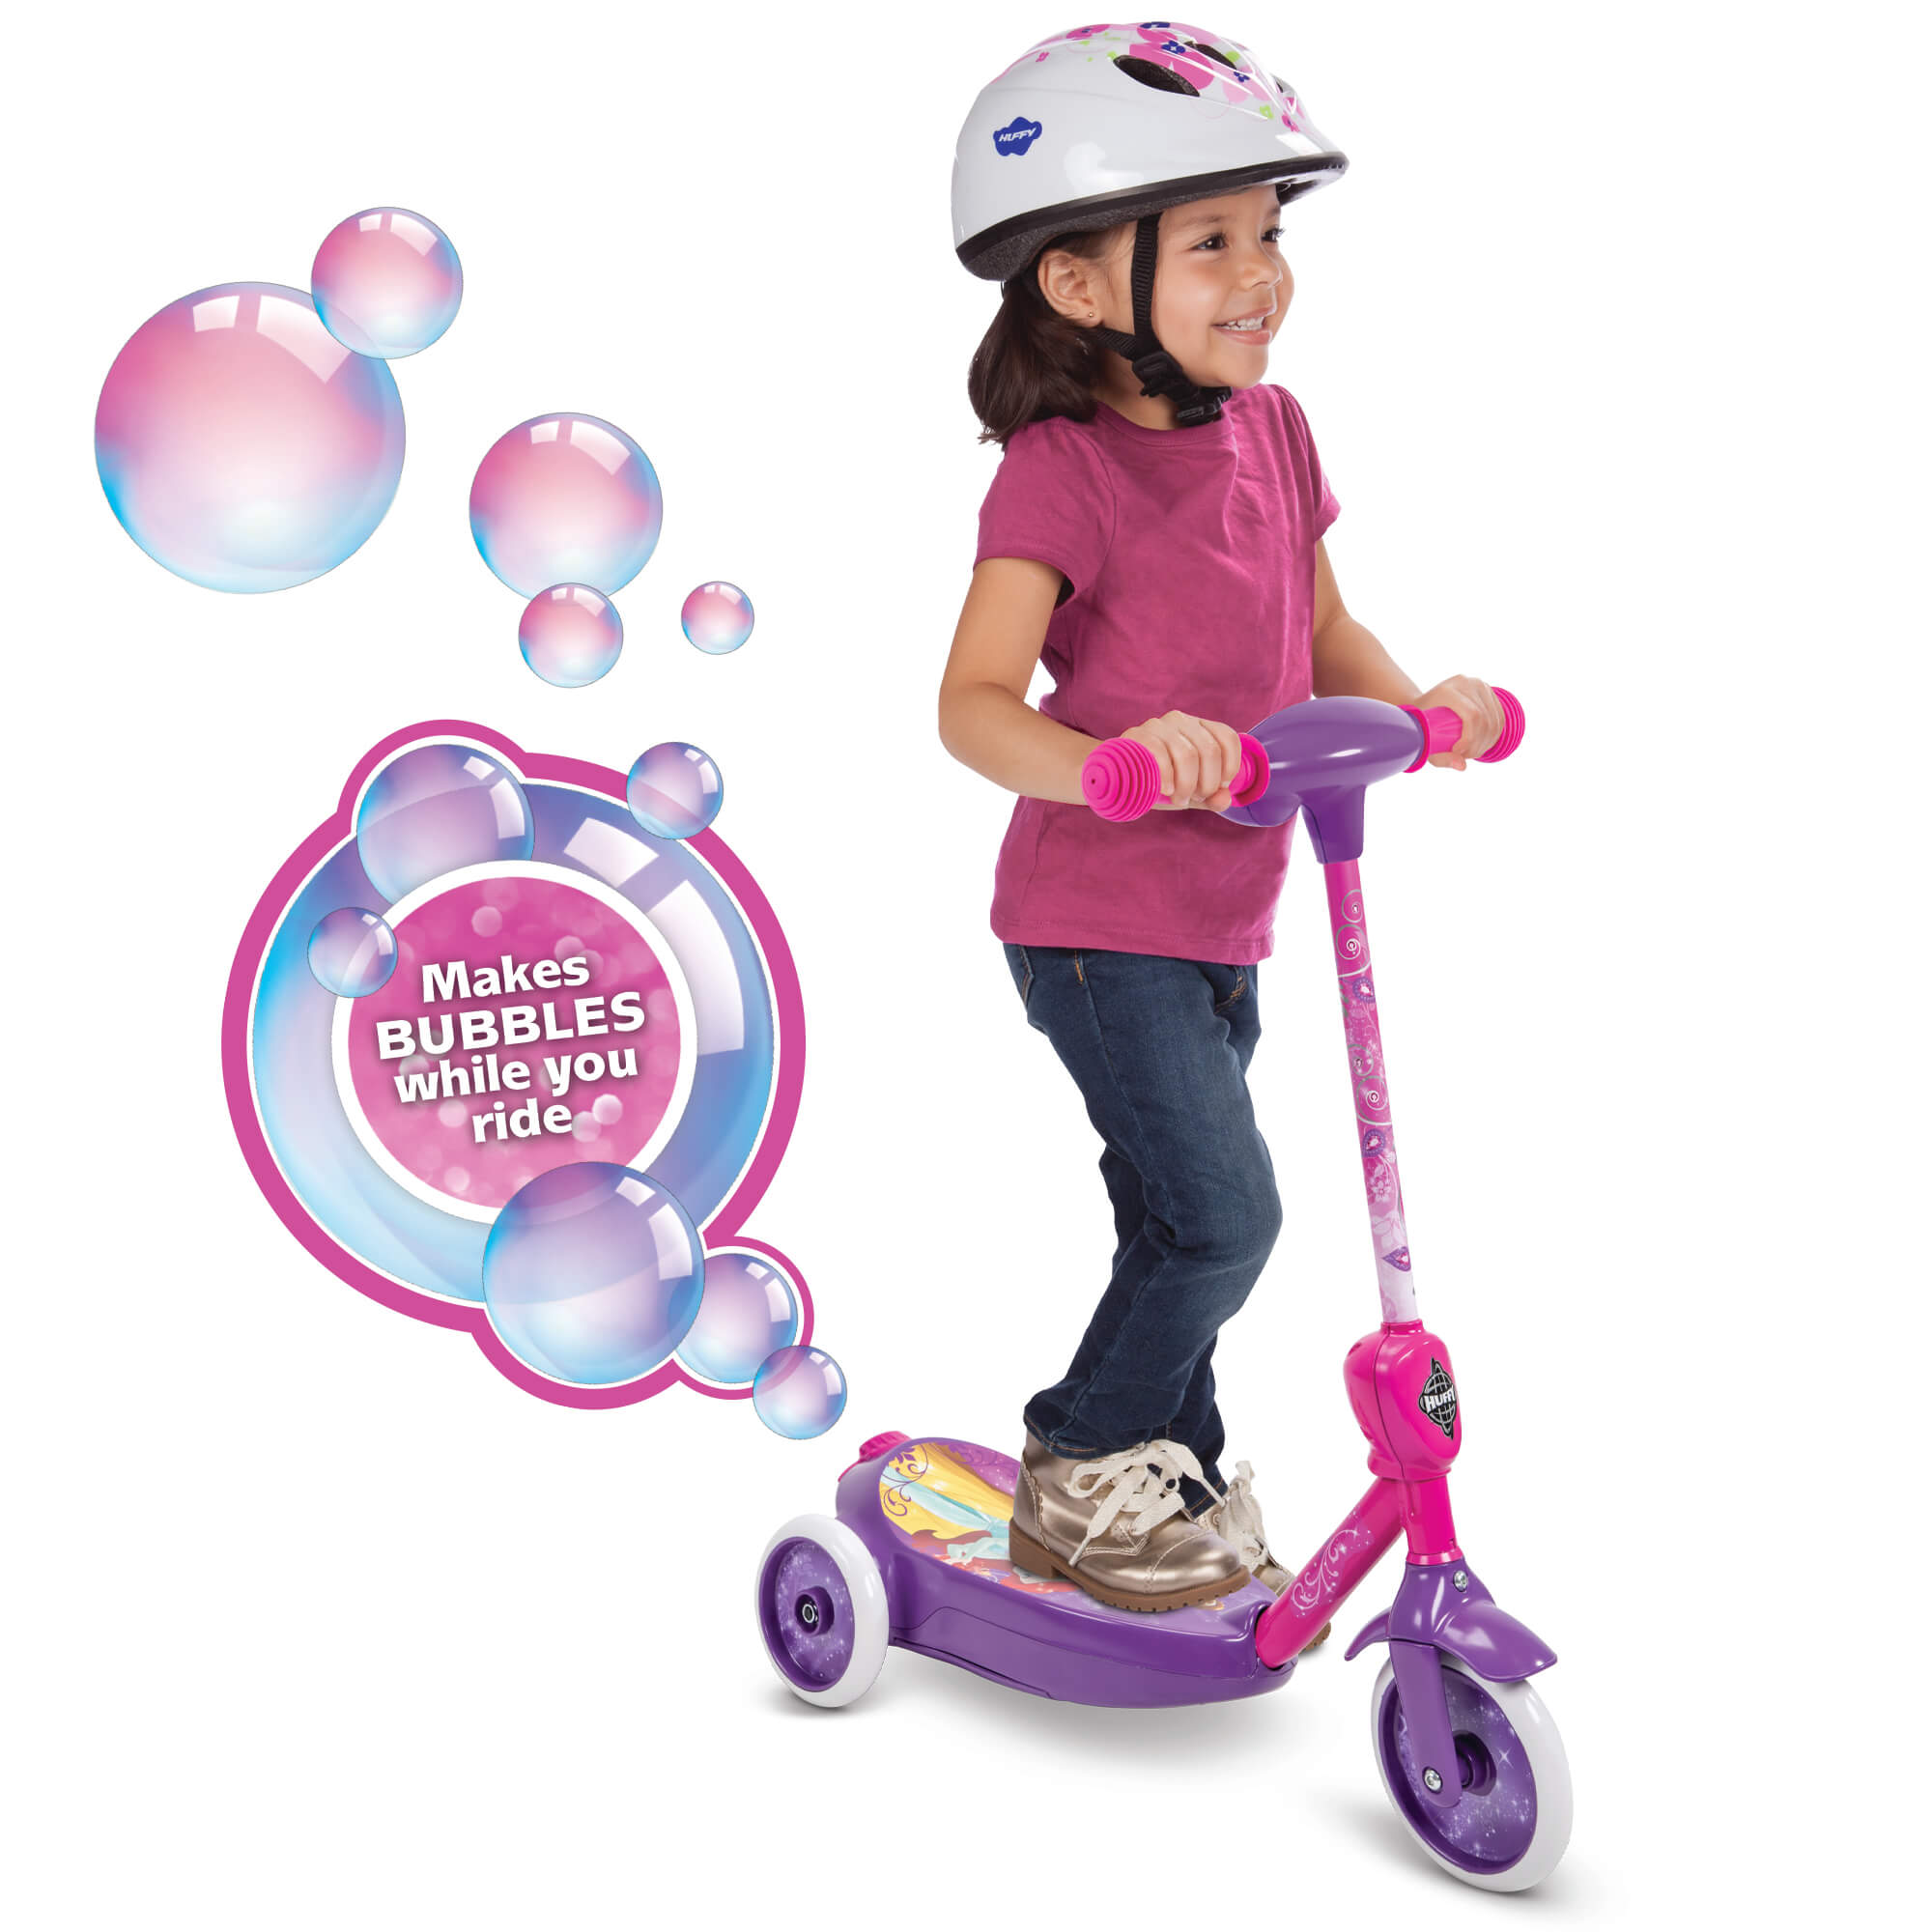 Disney Princess 6V 3-Wheel Electric Ride-On Bubble Scooter for Kids' - image 1 of 8